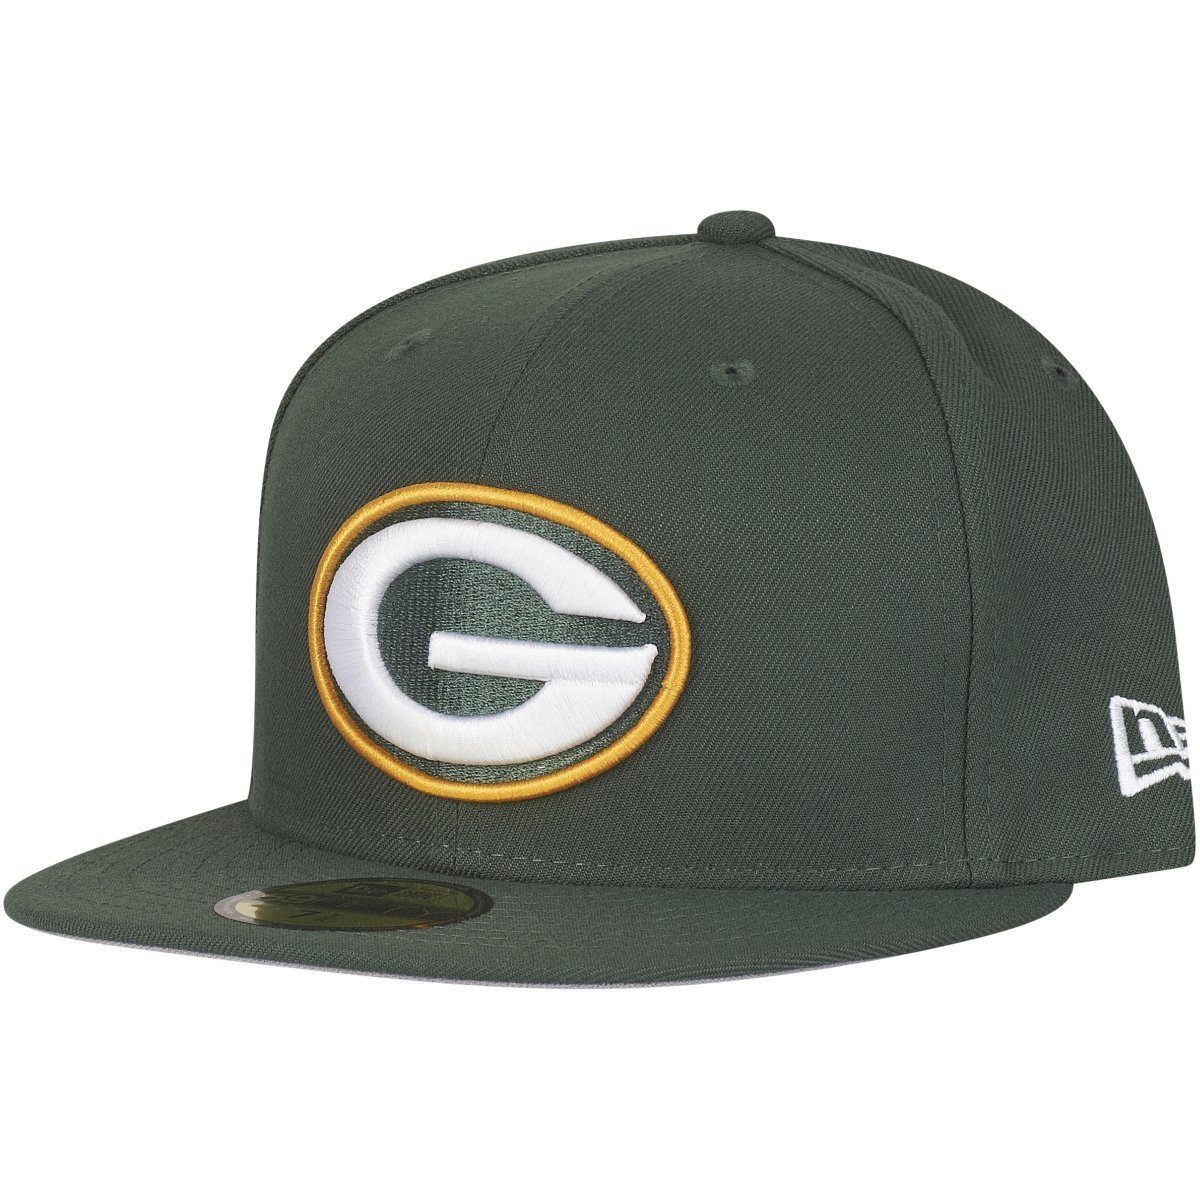 FIELD Green New NFL Cap Era 59Fifty Fitted Packers Bay celtic ON